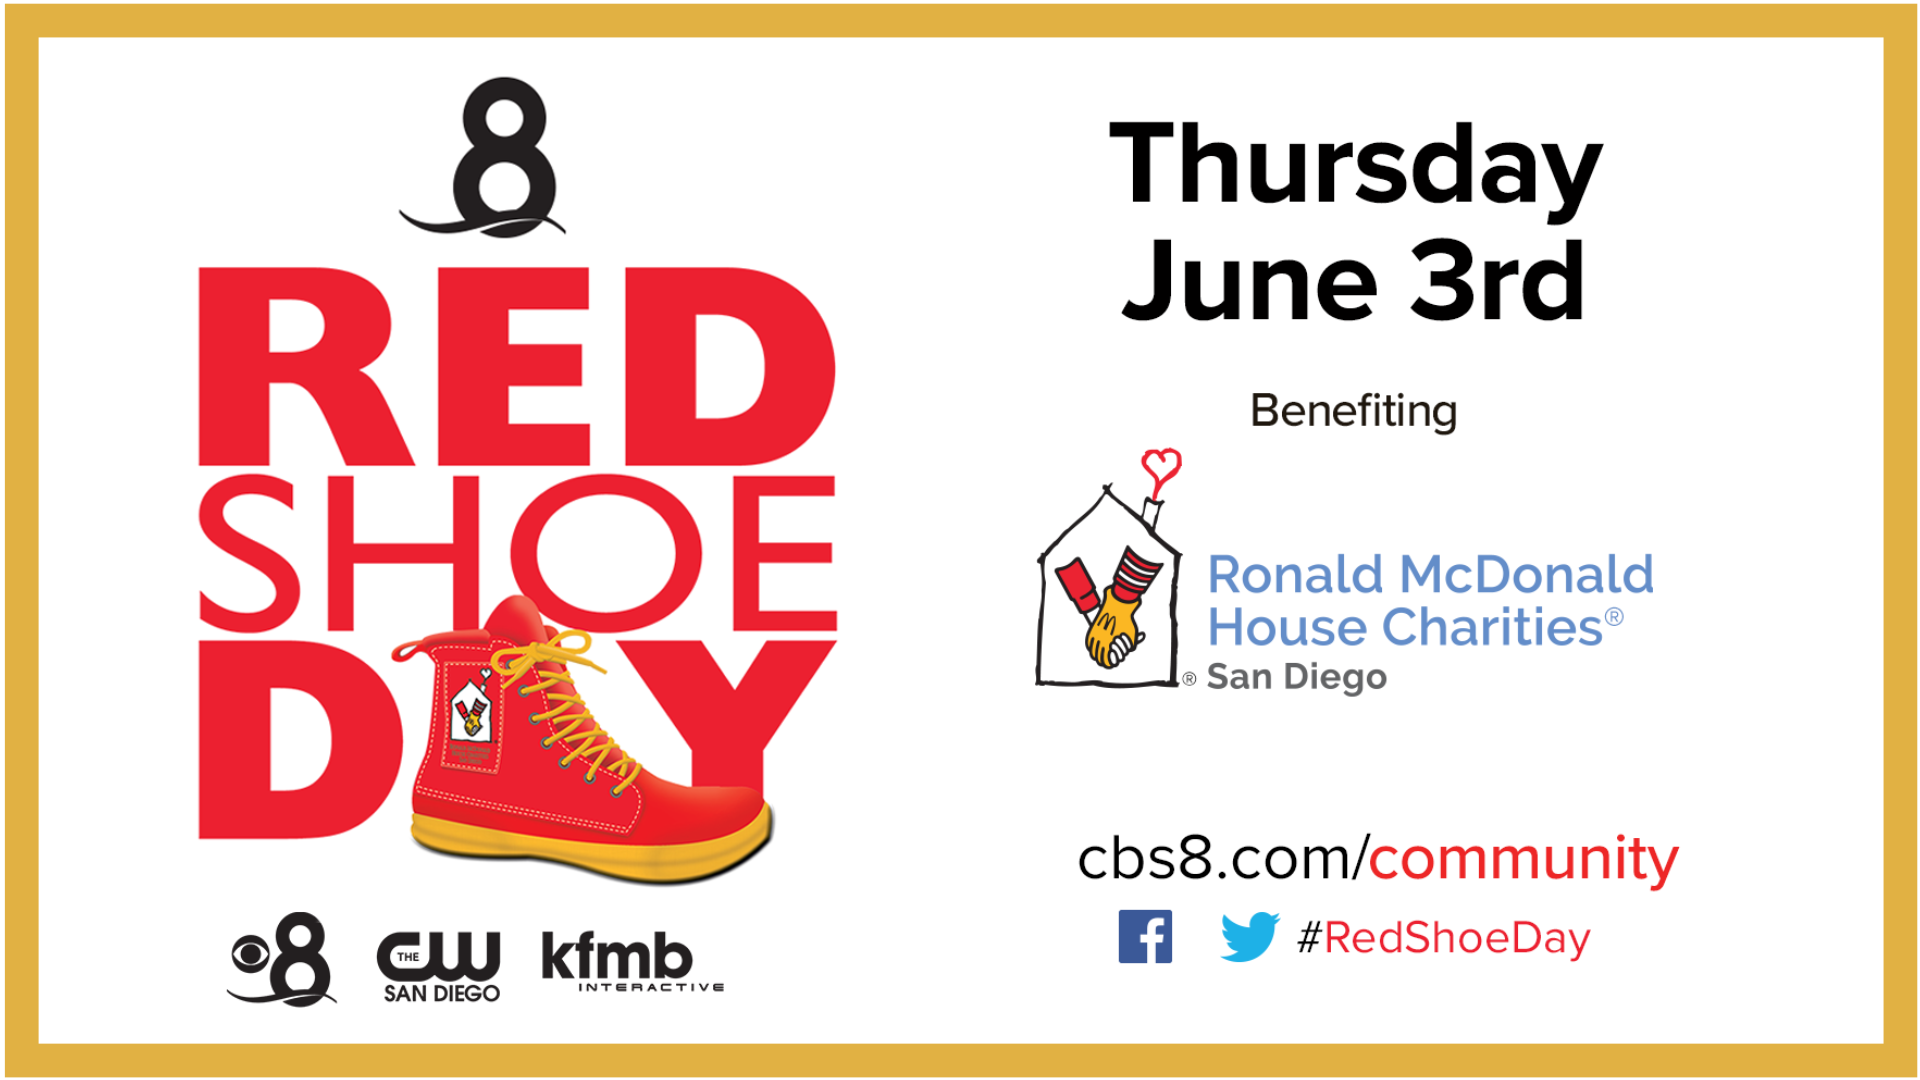 Save the Date, June 3, 2021, and help support San Diego's Ronald McDonald House to provide help for families of children in medical need.